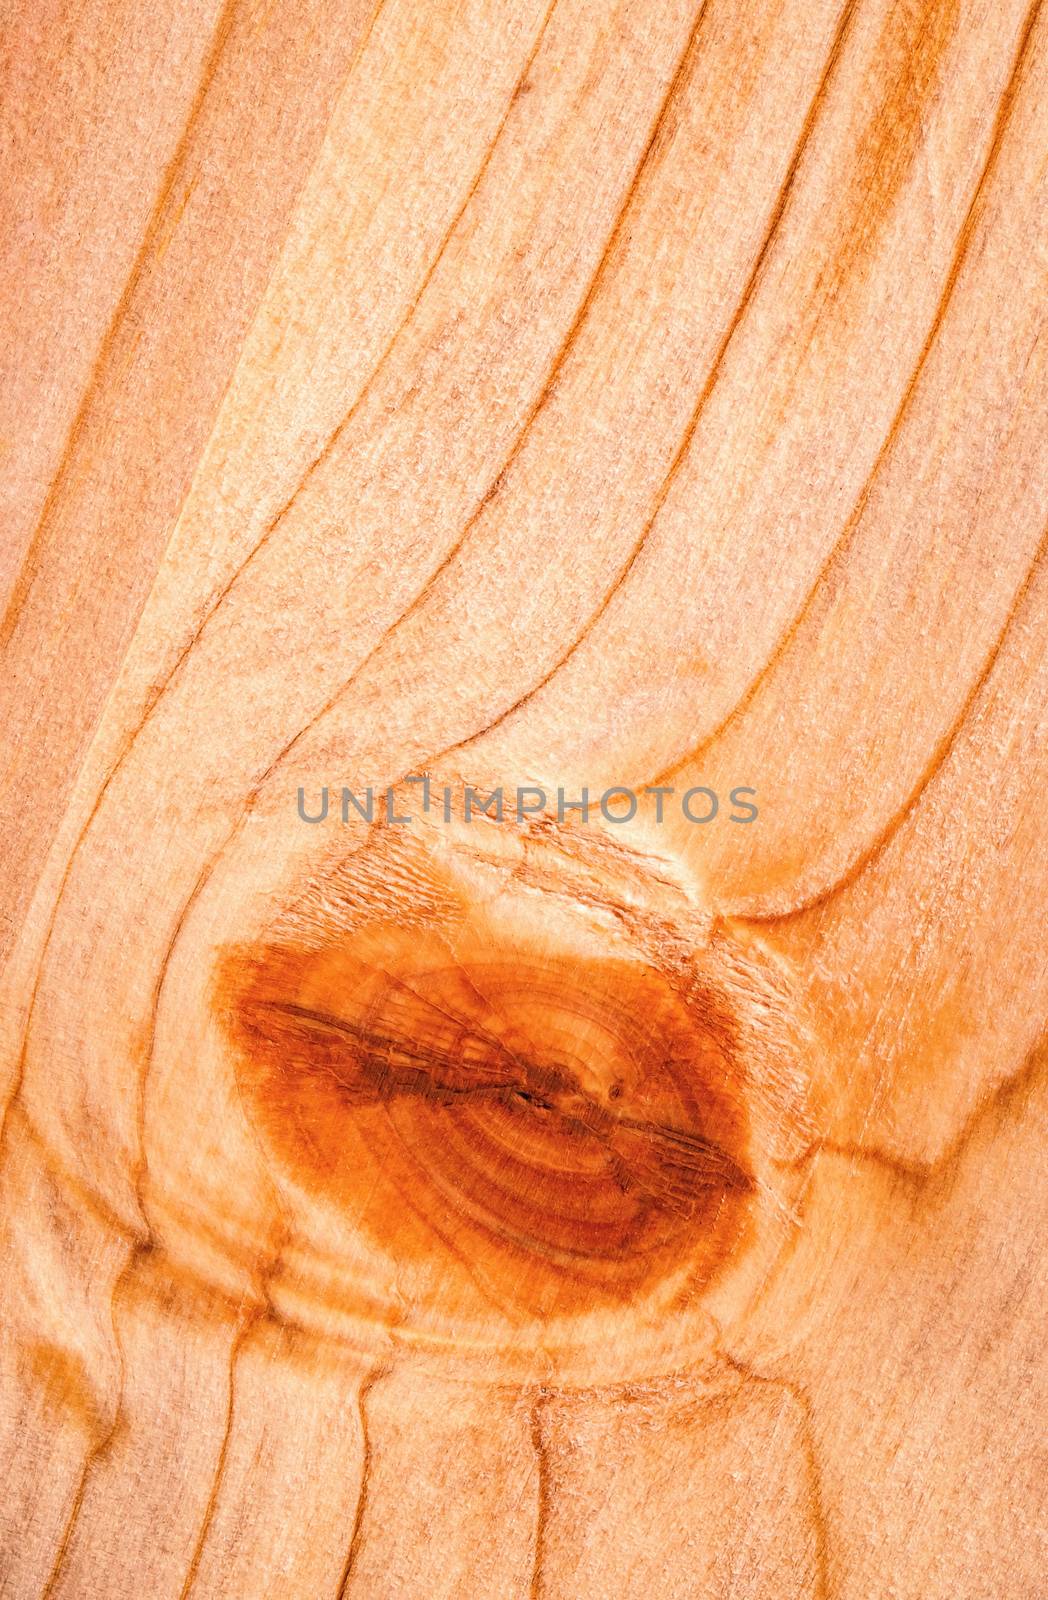 background or texture detail of a wooden board with a bump